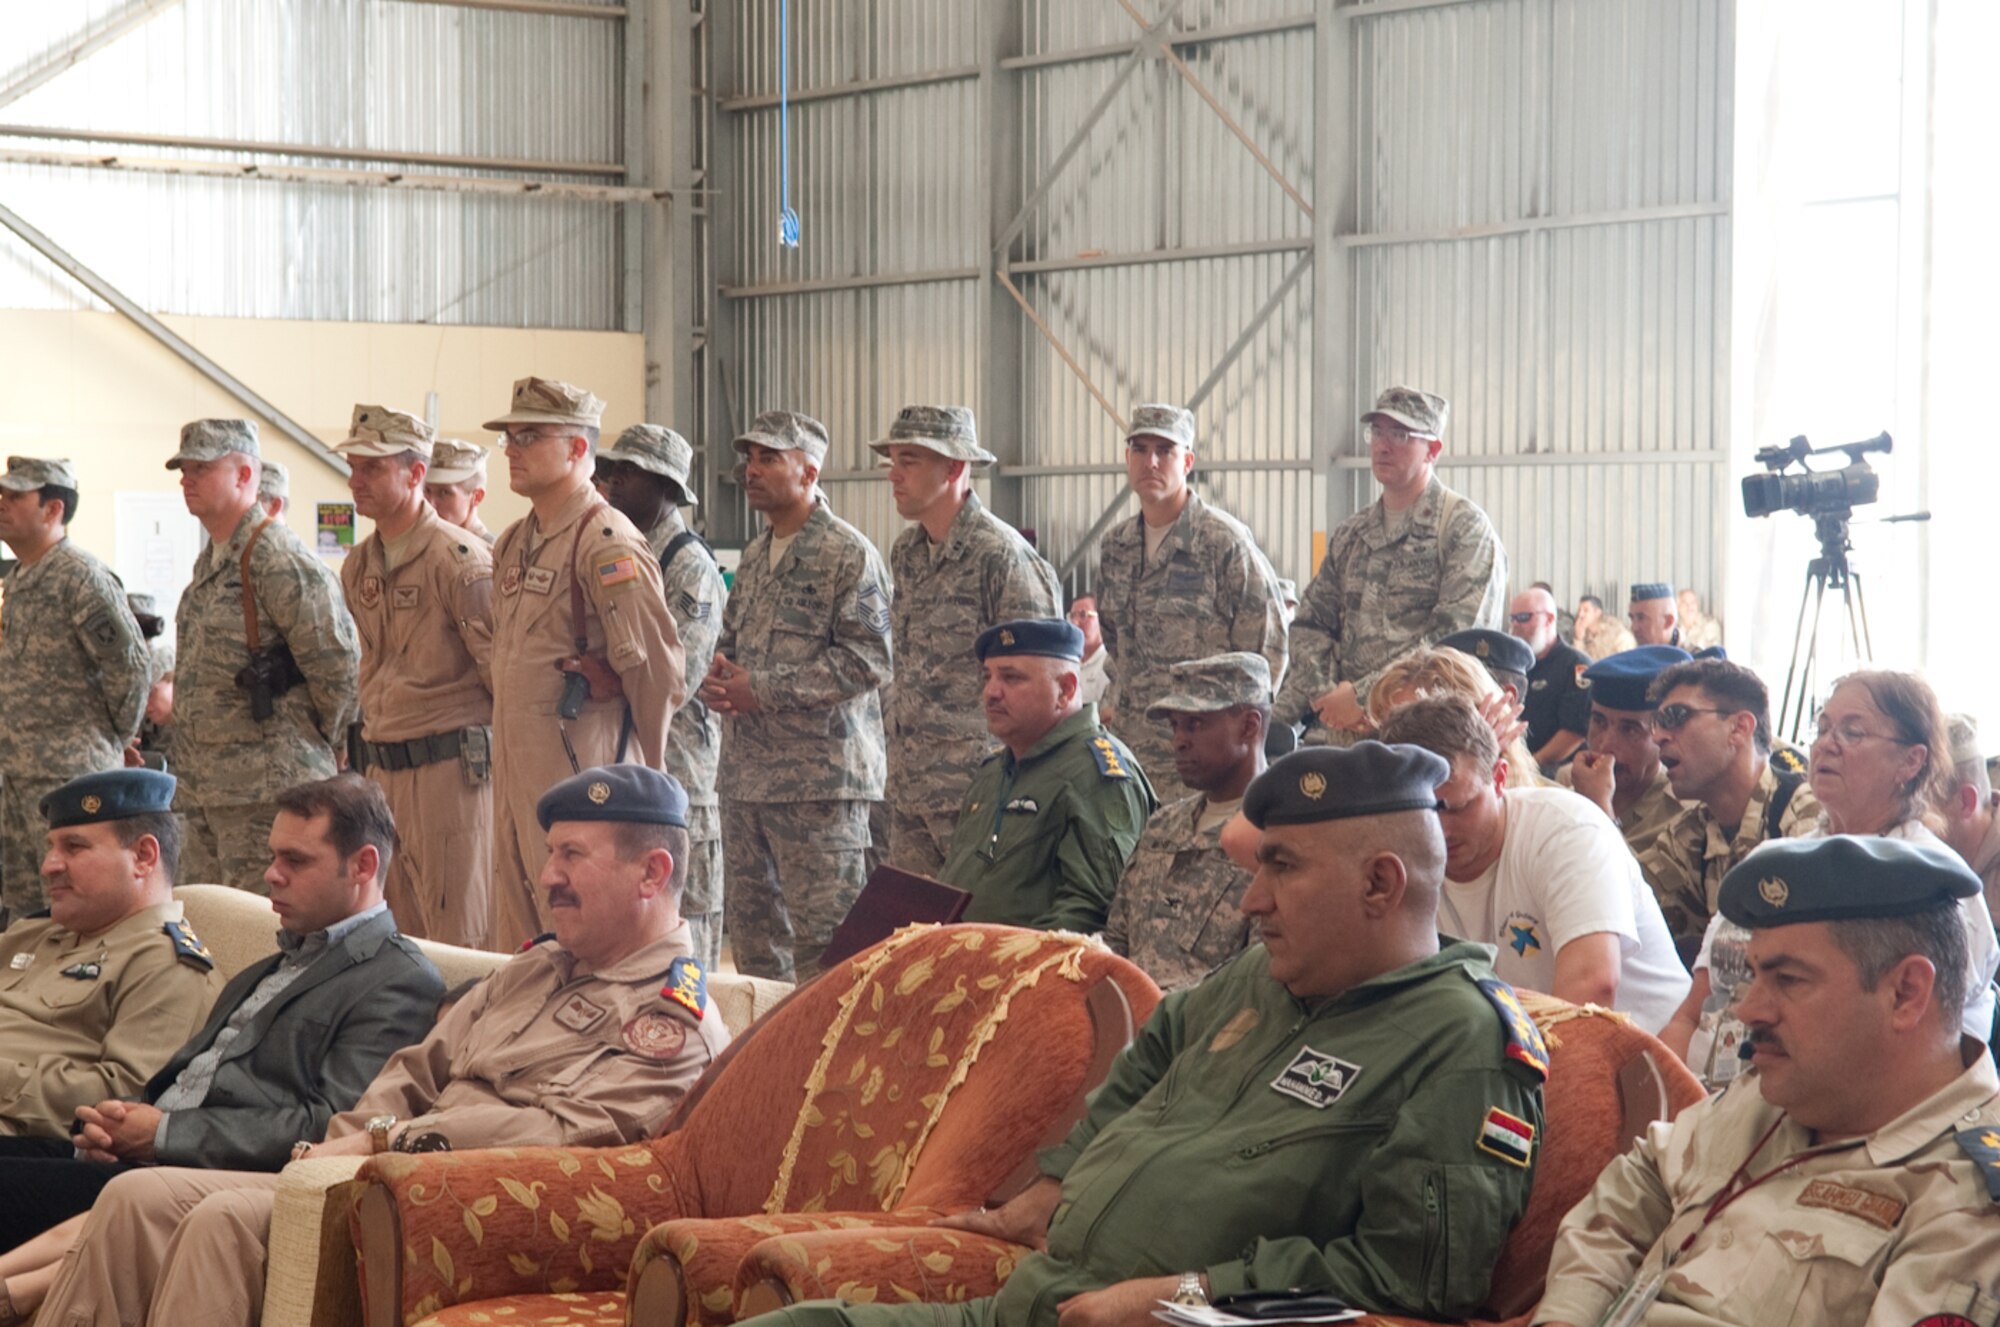 U.S. and Iraqi Air Force members witness the change of command ceremony of Col. Shaun Turner,  who assumed command of the 321st Air Expeditionary Advisory Group at Kirkuk Regional Air Base, Iraq, June 14, 2010. The group's mission is to advise and assist the Iraqi Air Force in developing credible, professional, and enduring capabilities.